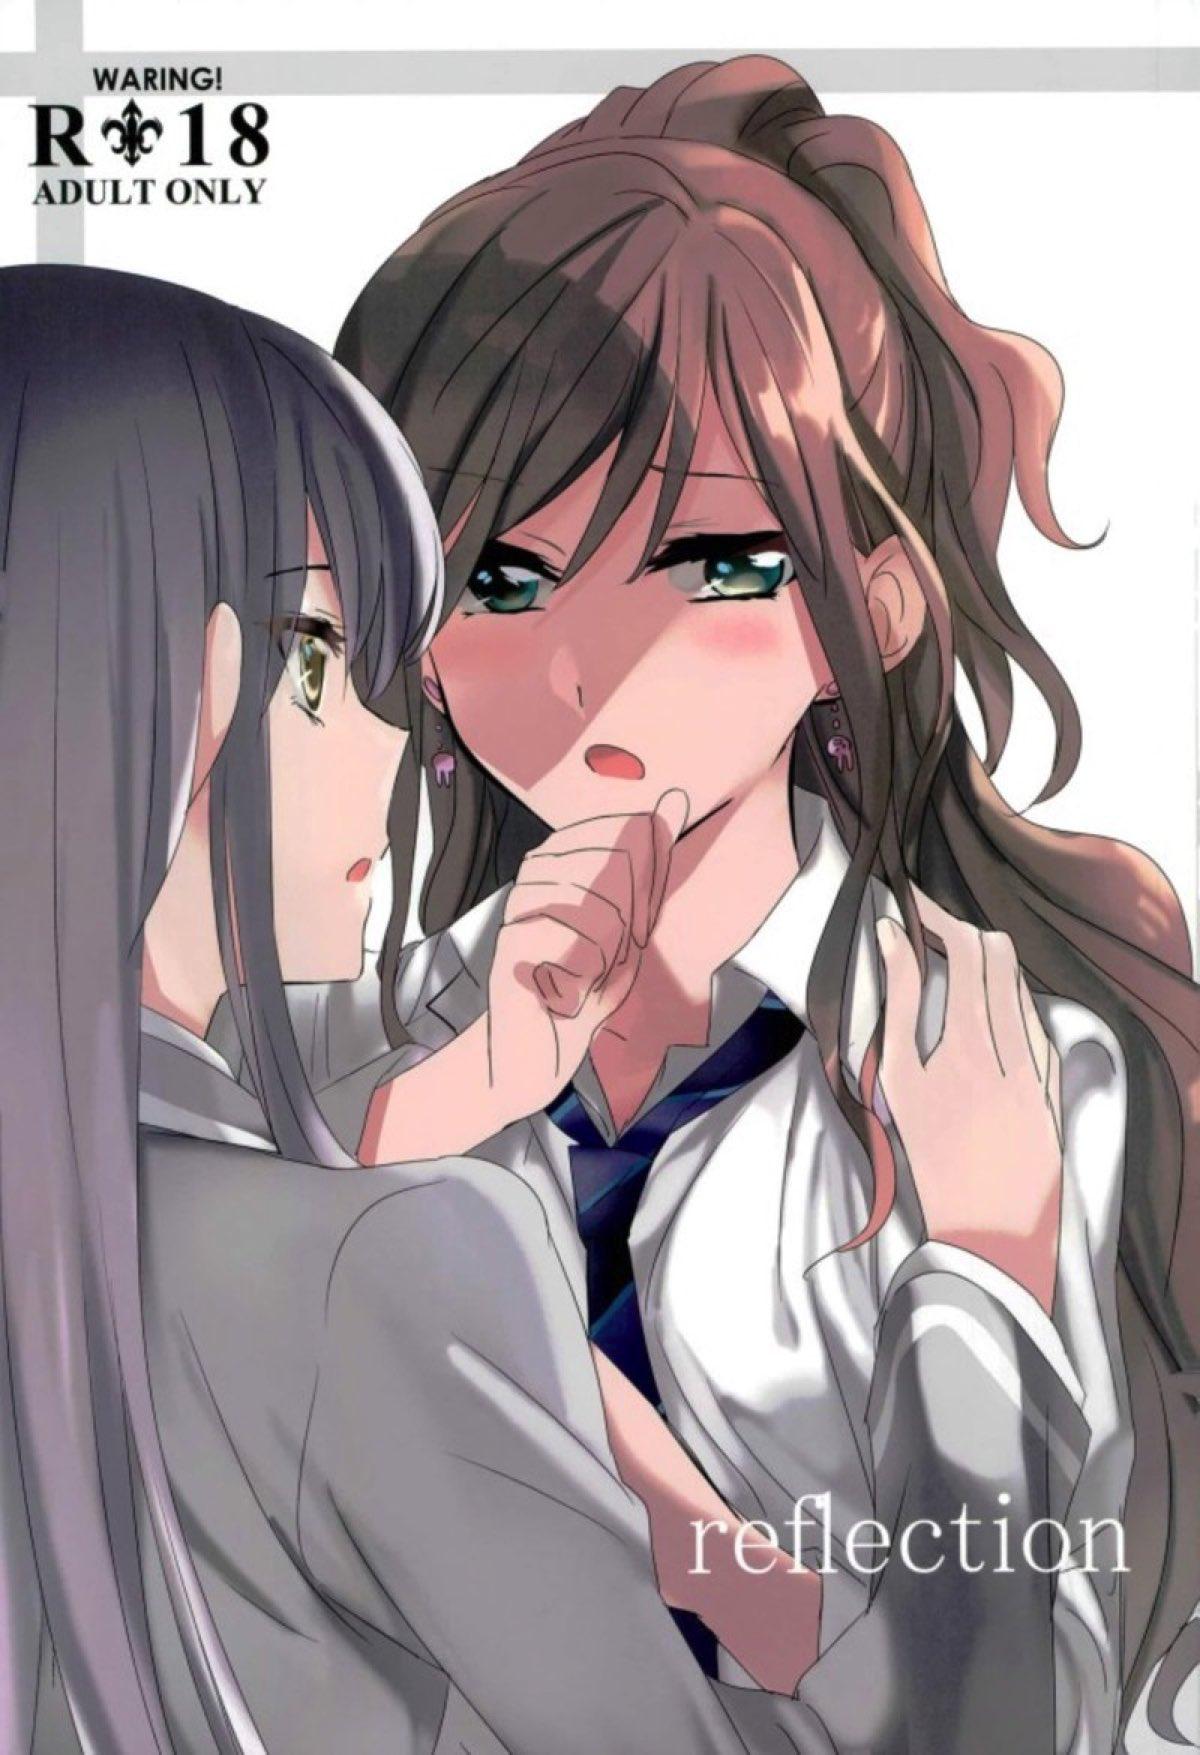 Gay Oralsex reflection - Bang dream Shoplifter - Picture 1